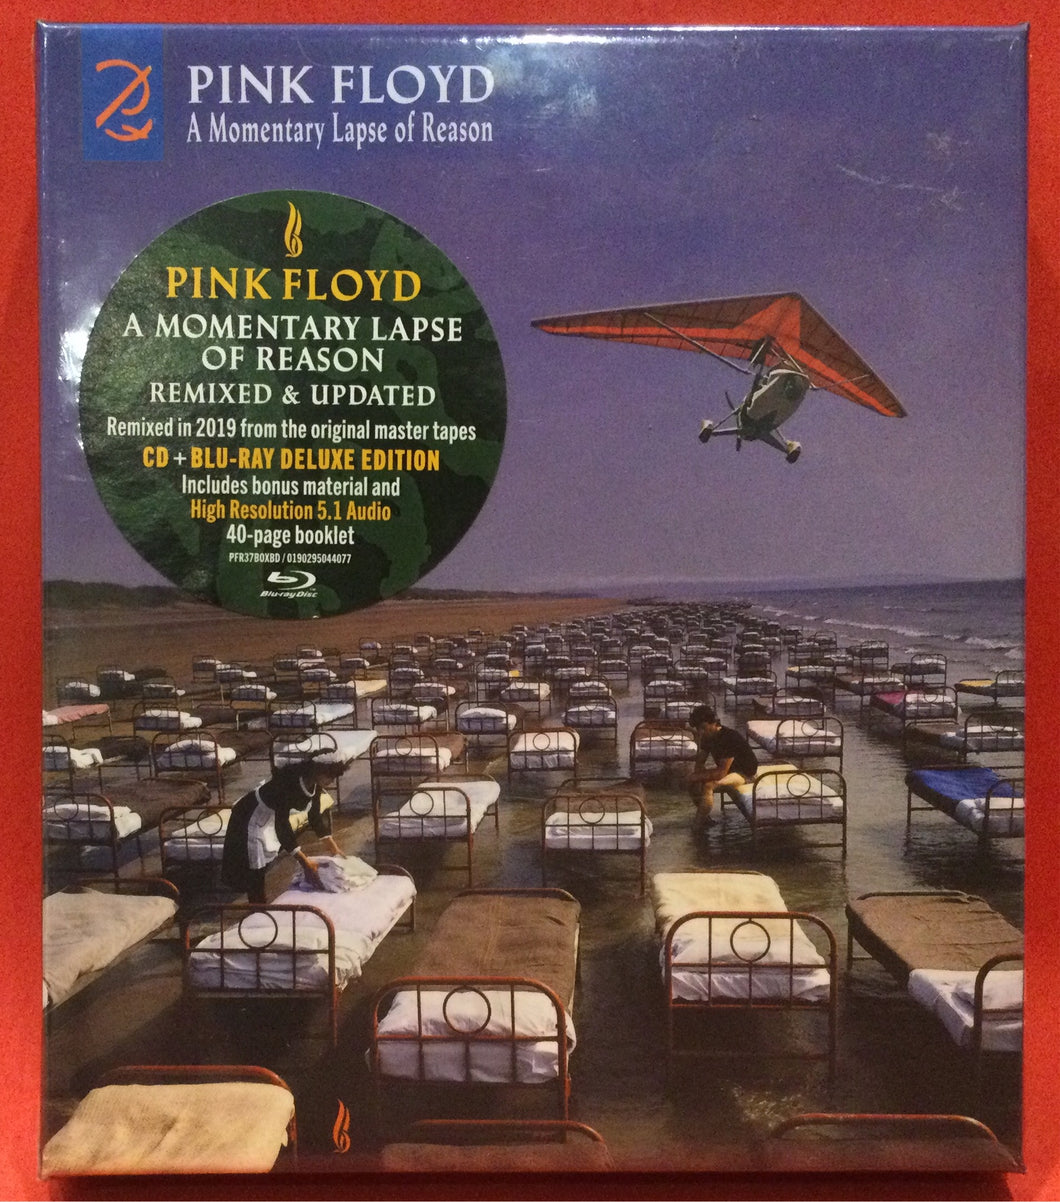 PINK FLOYD - A MOMENTARY LAPSE OF REASON - CD + BLU-RAY DELUXE EDITION - 2 DISCS (SEALED)